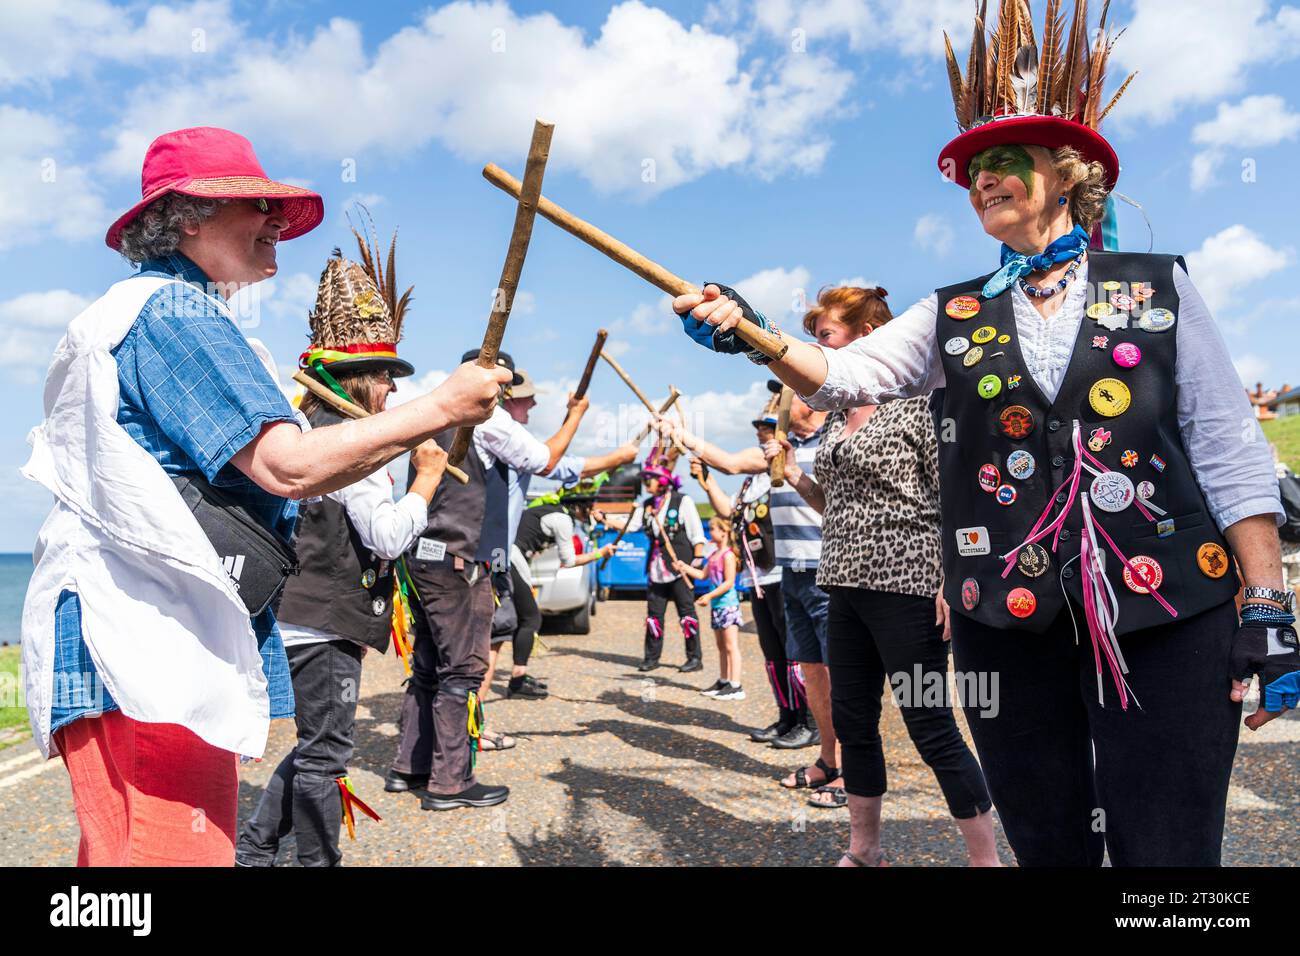 Dead Horse Morrismen holding sticks, dancing with members of the public on Herne Bay sea front during the summer. Bright sunshine and blue sky. Stock Photo